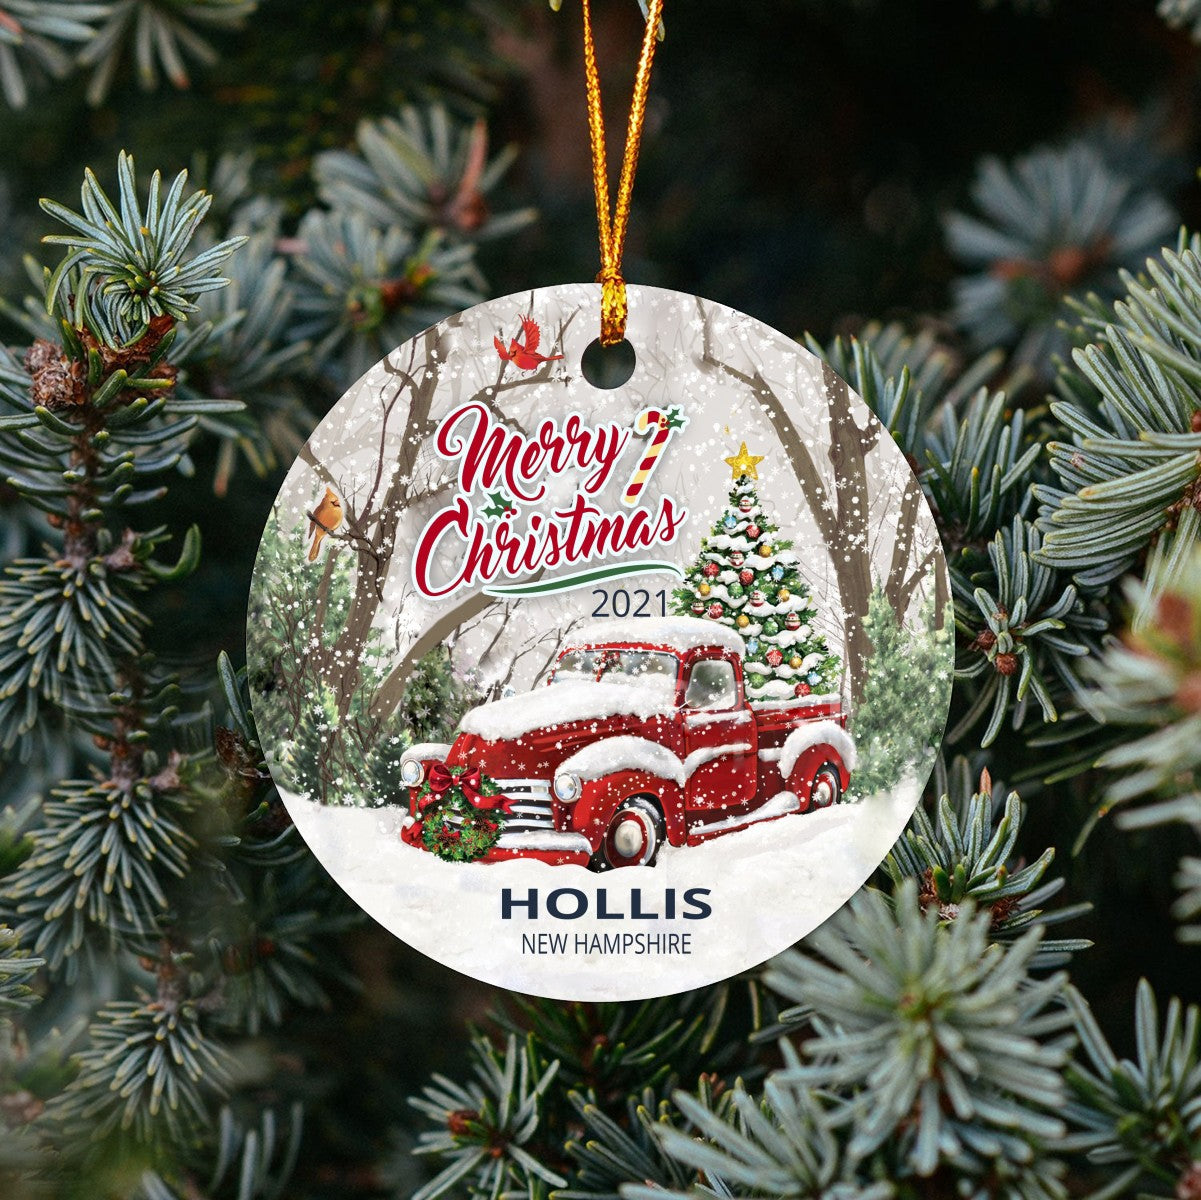 Christmas Tree Ornaments Hollis - Ornament With Name City, State Hollis New Hampshire NH Ornament - Red Truck Xmas Ornaments 3'' Plastic Gift For Family, Friend And Housewarming